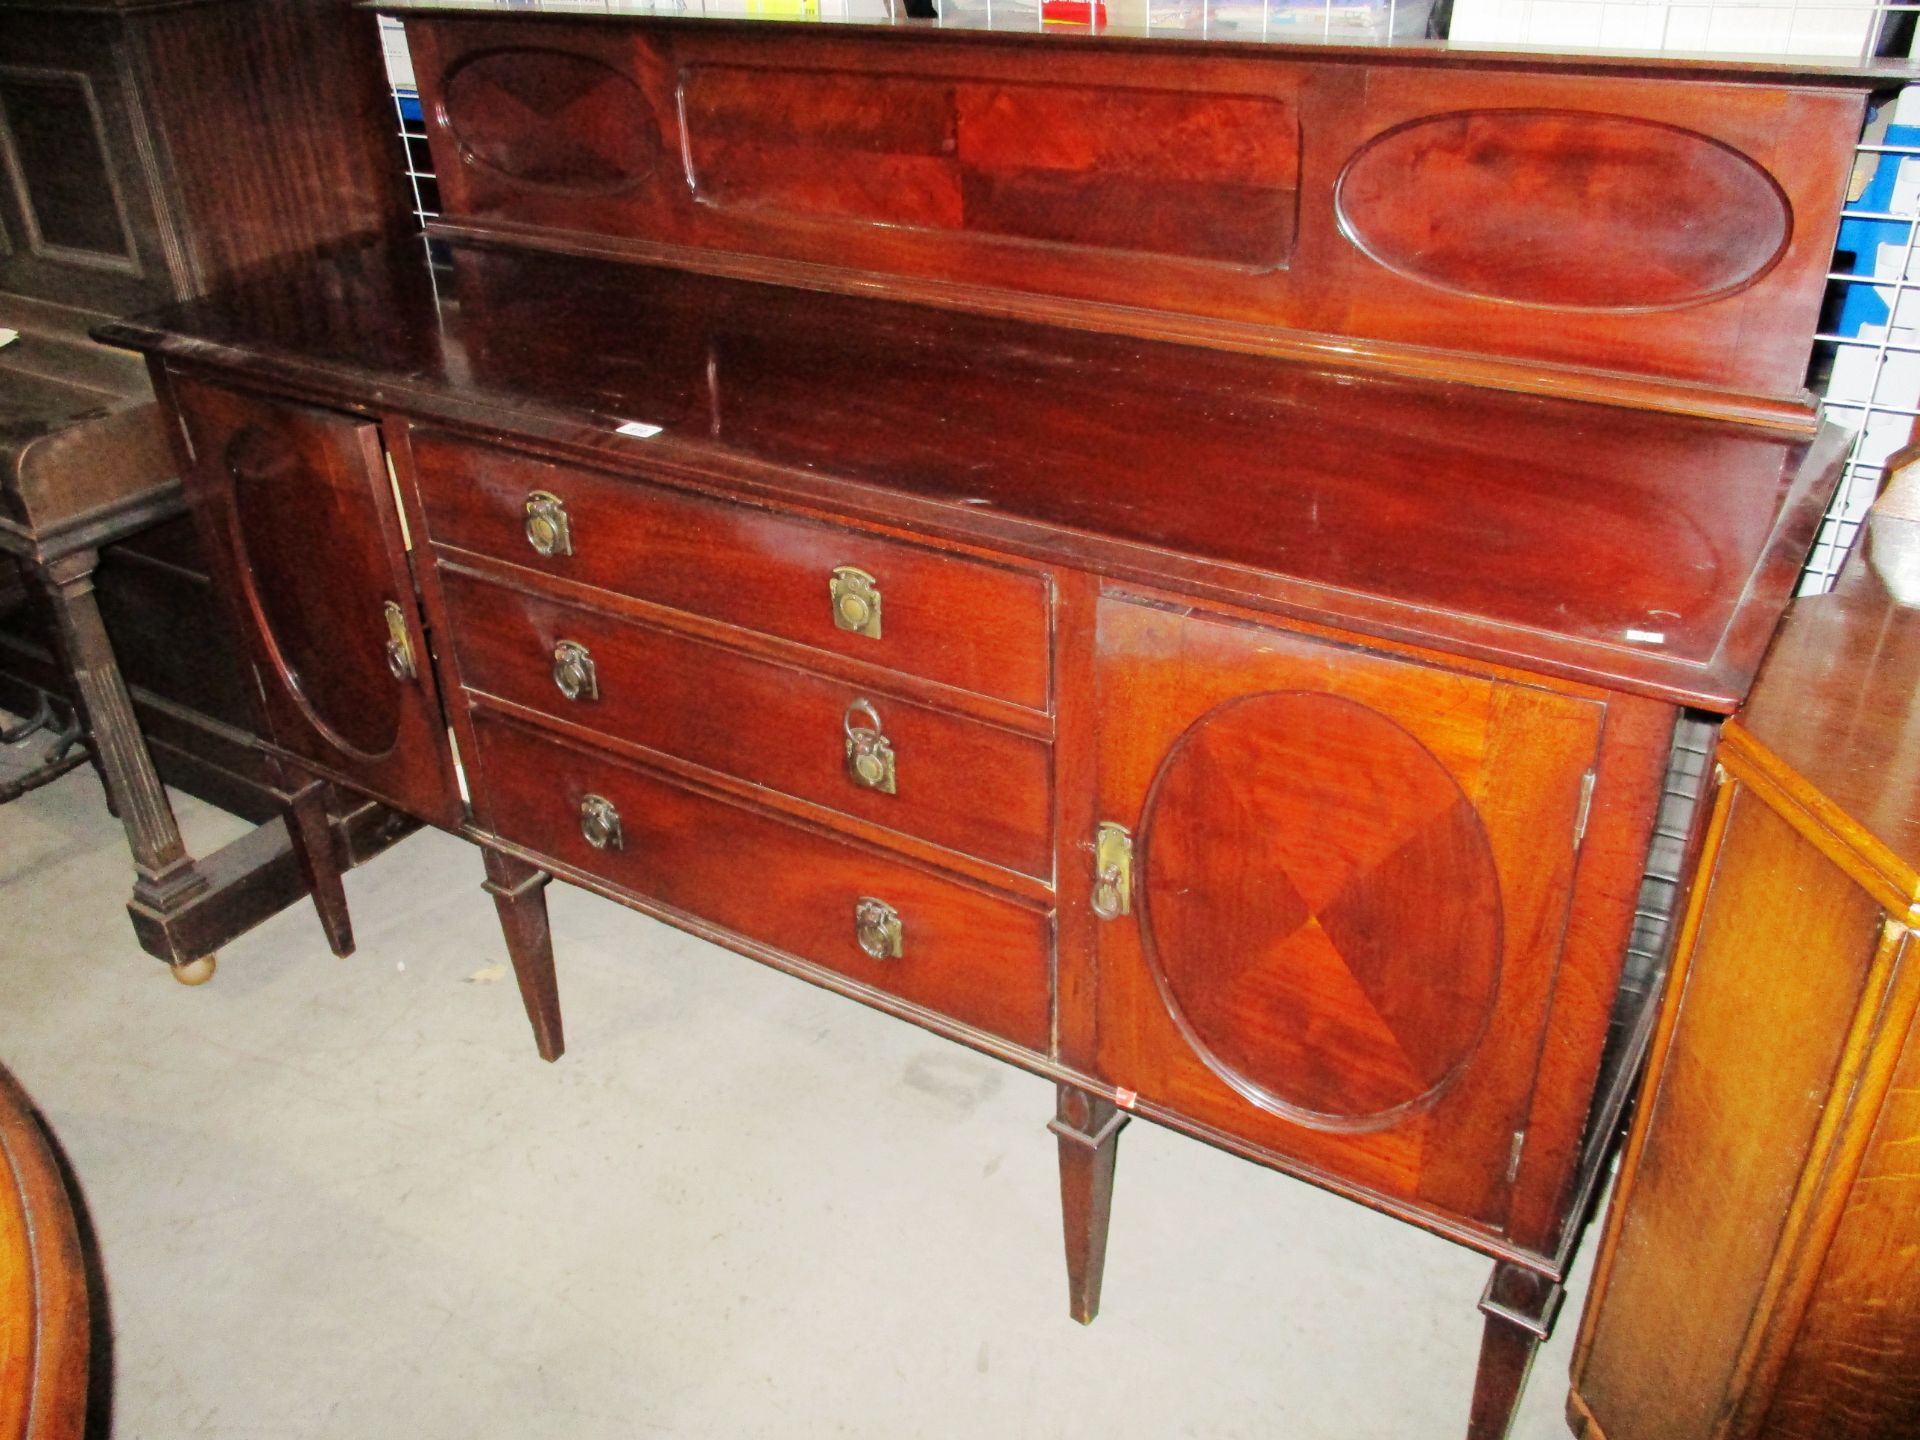 A mahogany 2 door 3 drawer sideboard with back 175cm